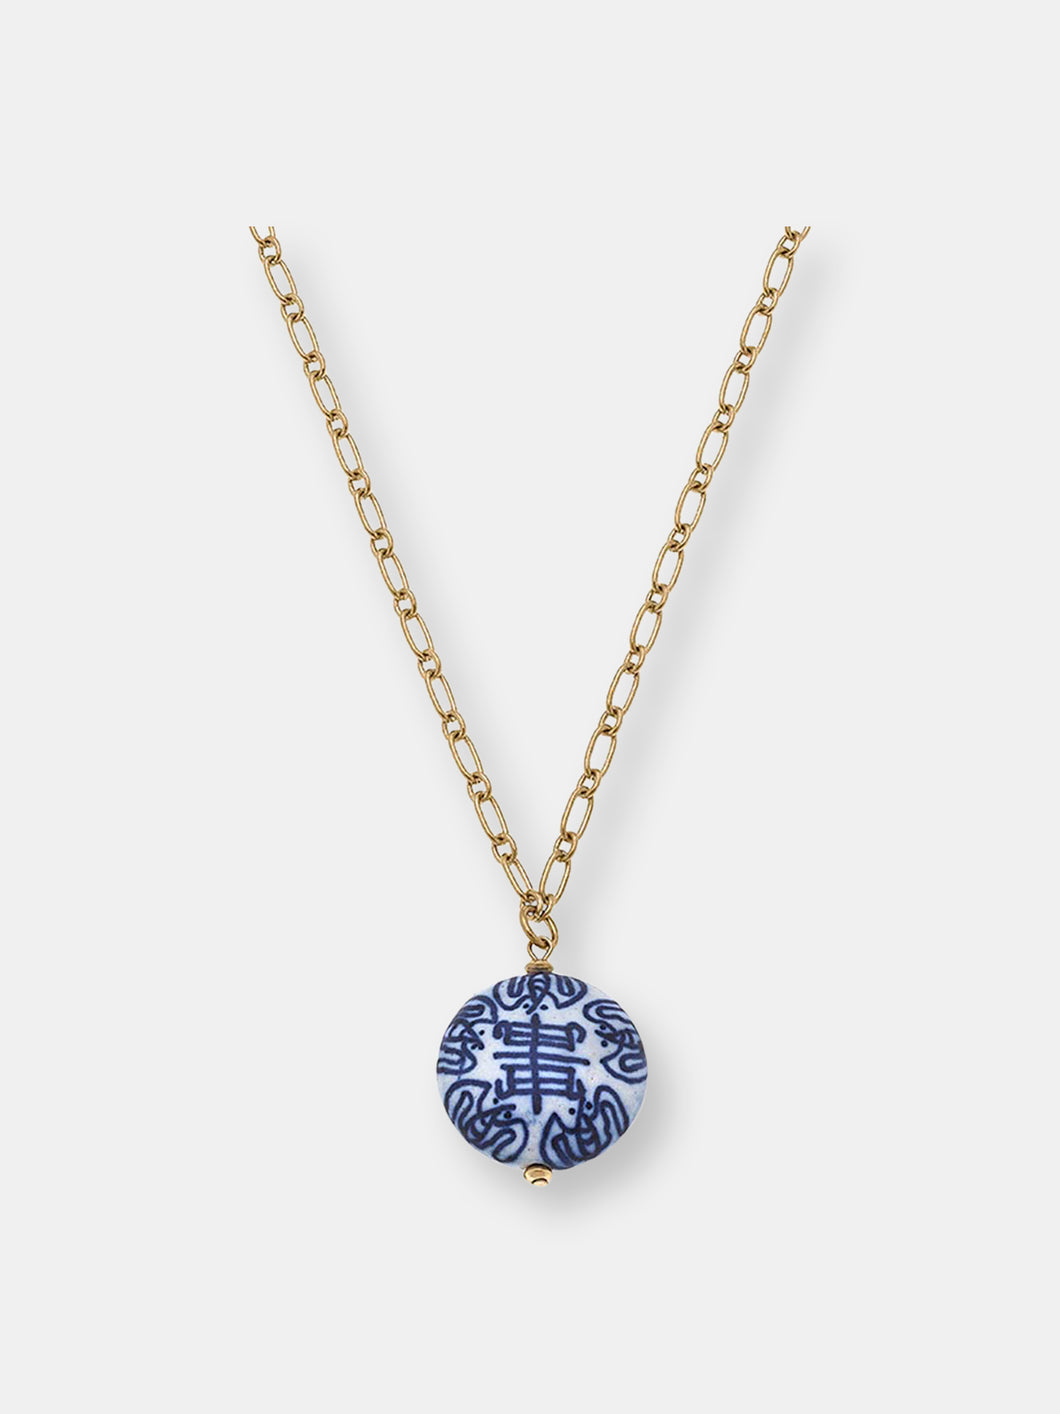 Francesca Chinoiserie Necklace in Blue & White